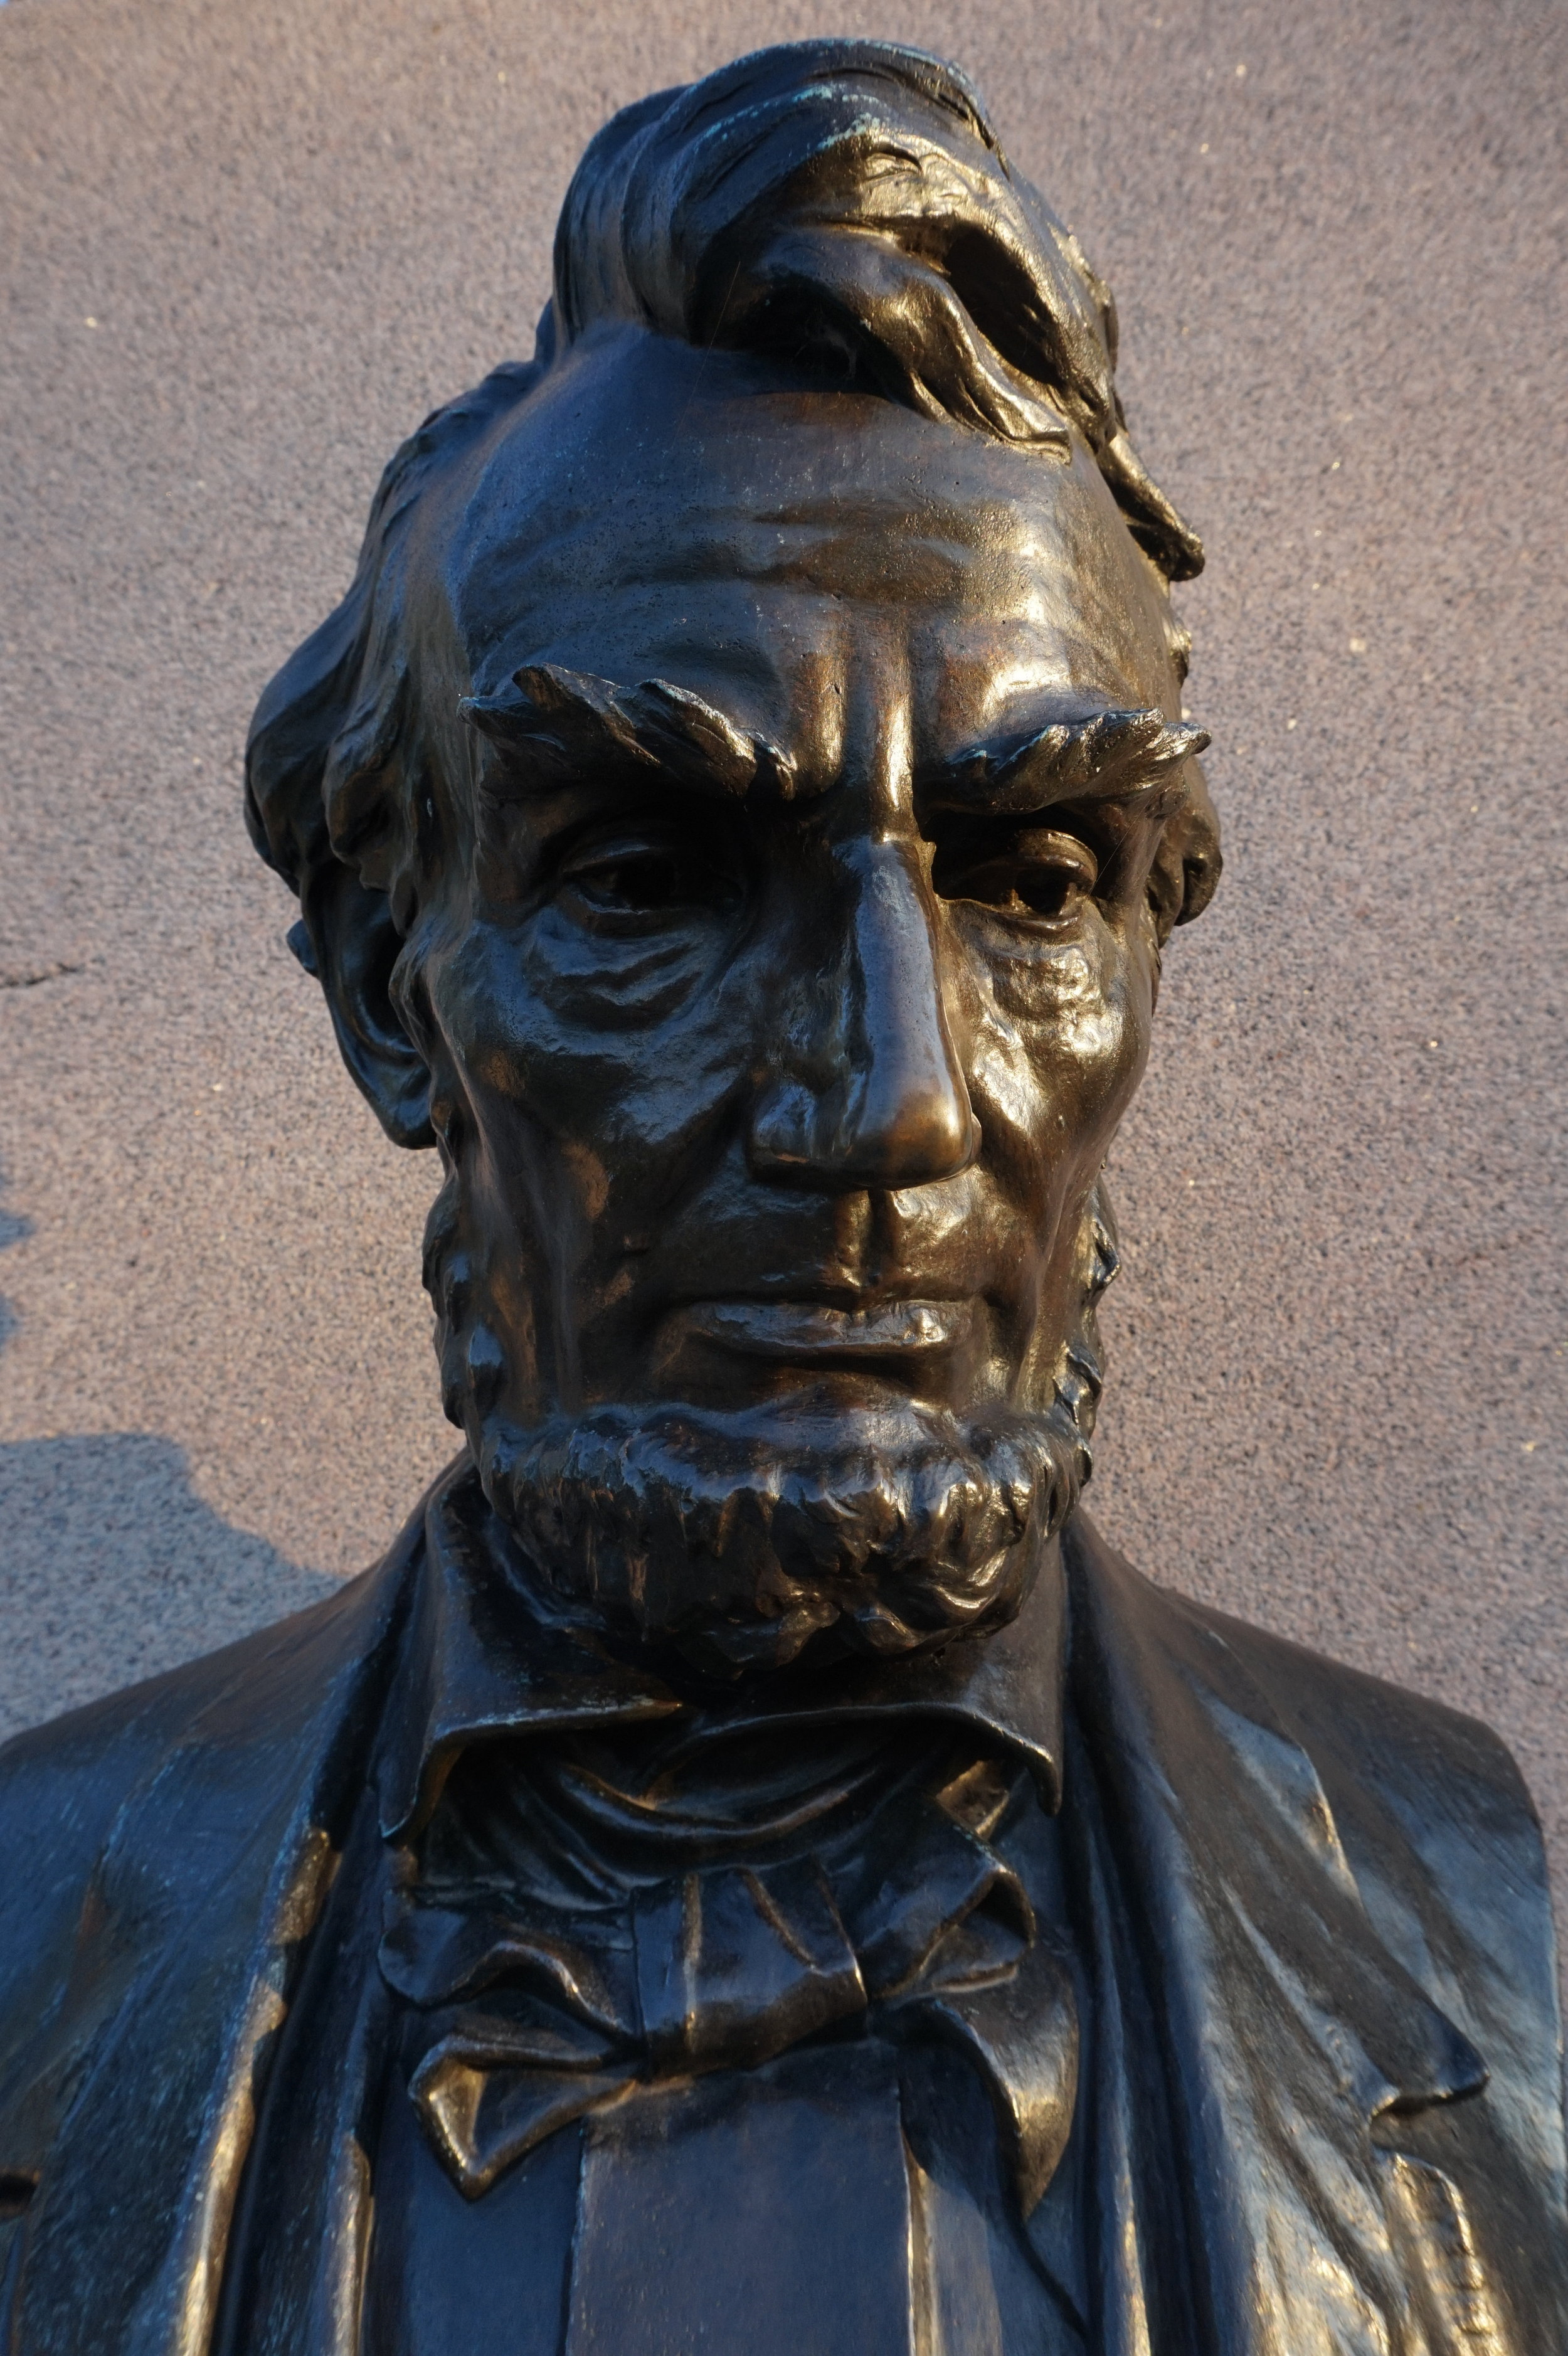  Bust of Abraham Lincoln at the Soldiers' National Cemetery, where he delivered the Gettysburg Address on November 19, 1863. 